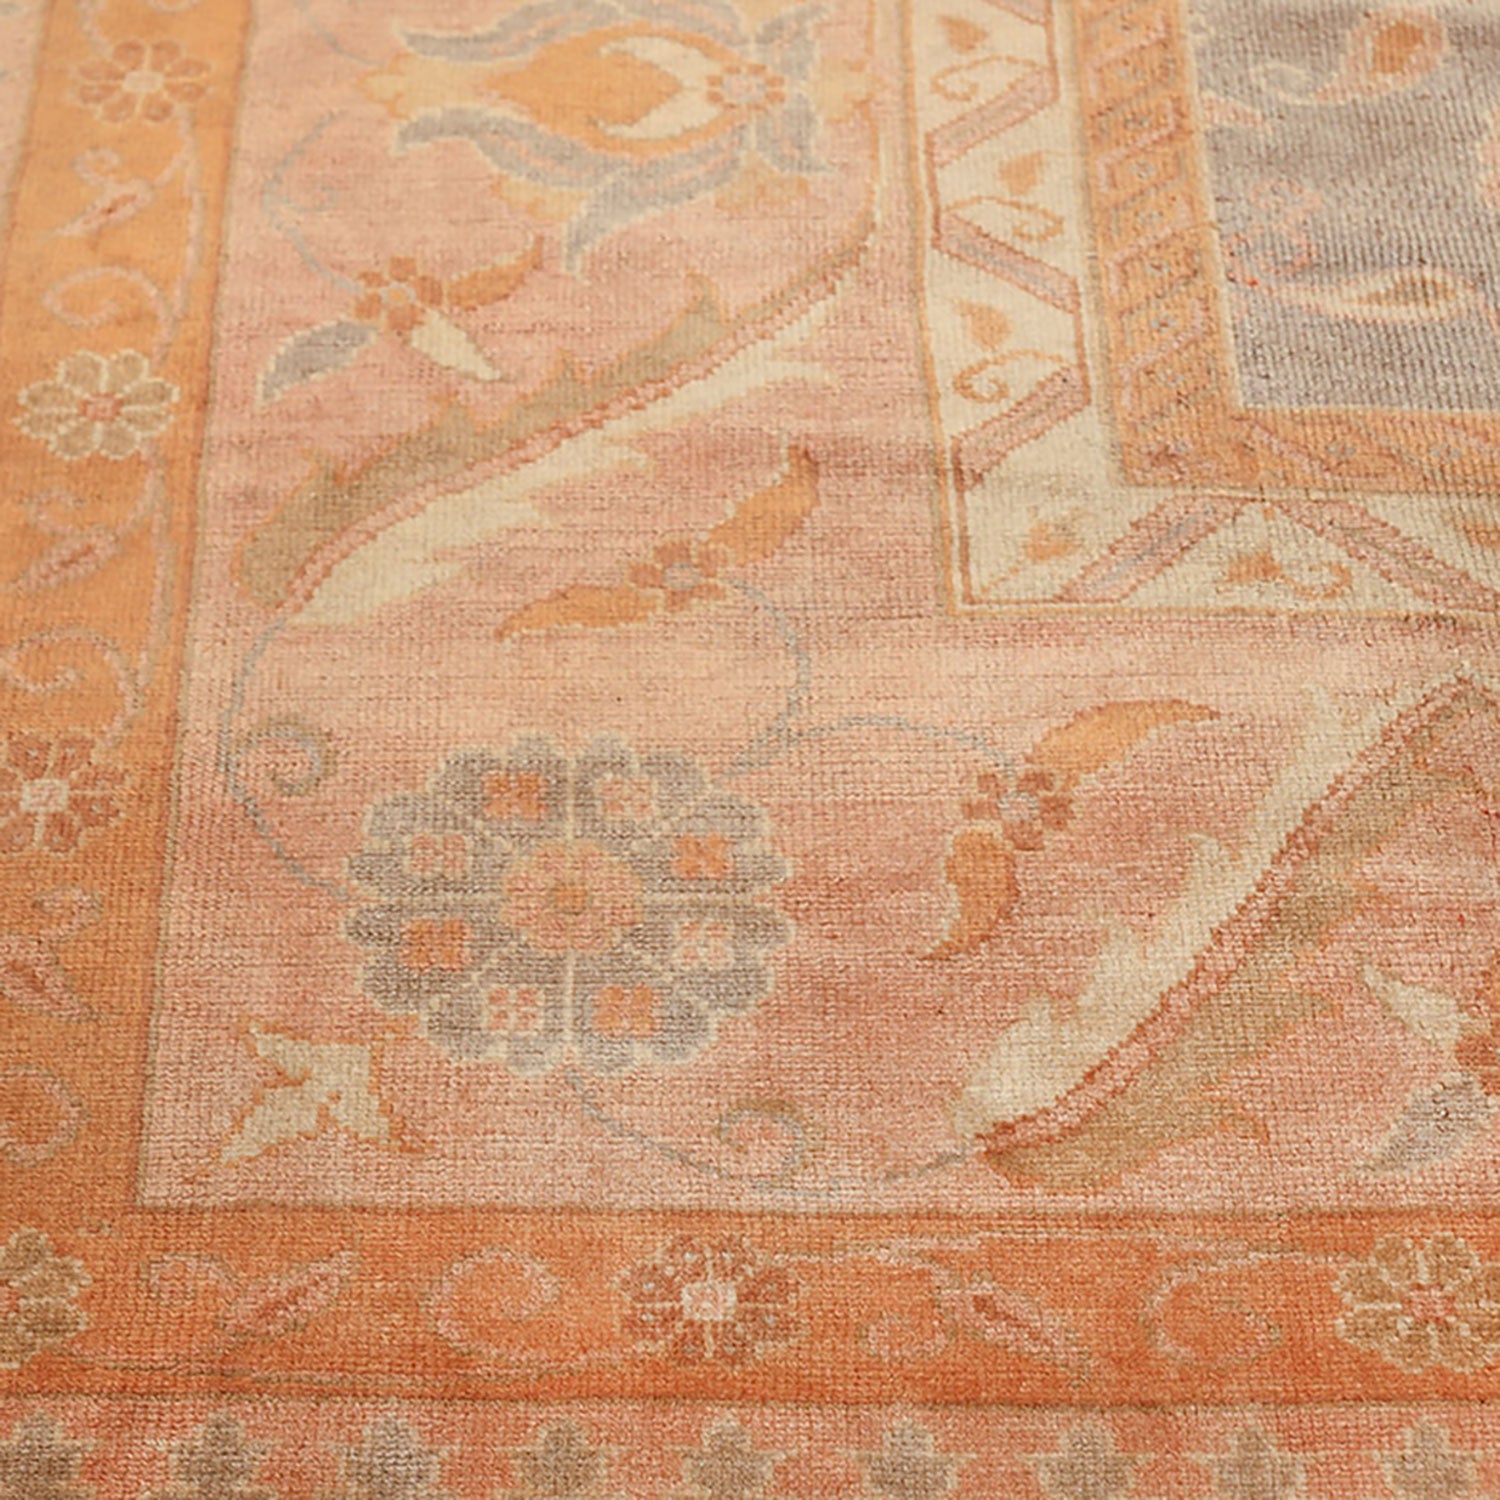 Intricate floral rug with warm, faded colors and symmetrical design.